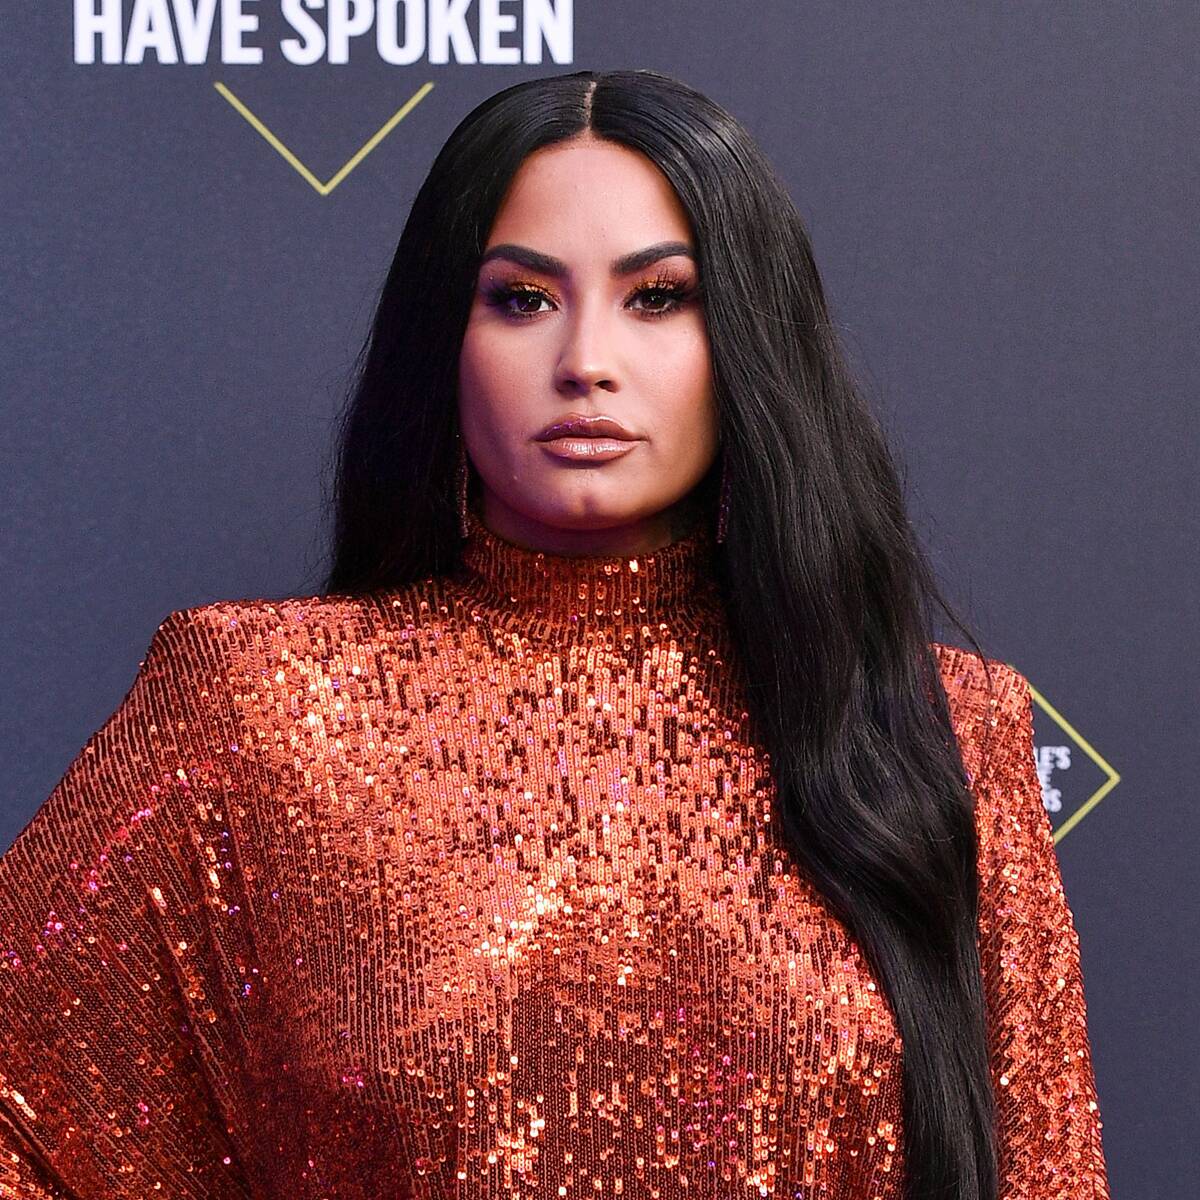 Demi Lovato Says She Suffered 3 Strokes and a Heart Attack After Overdose